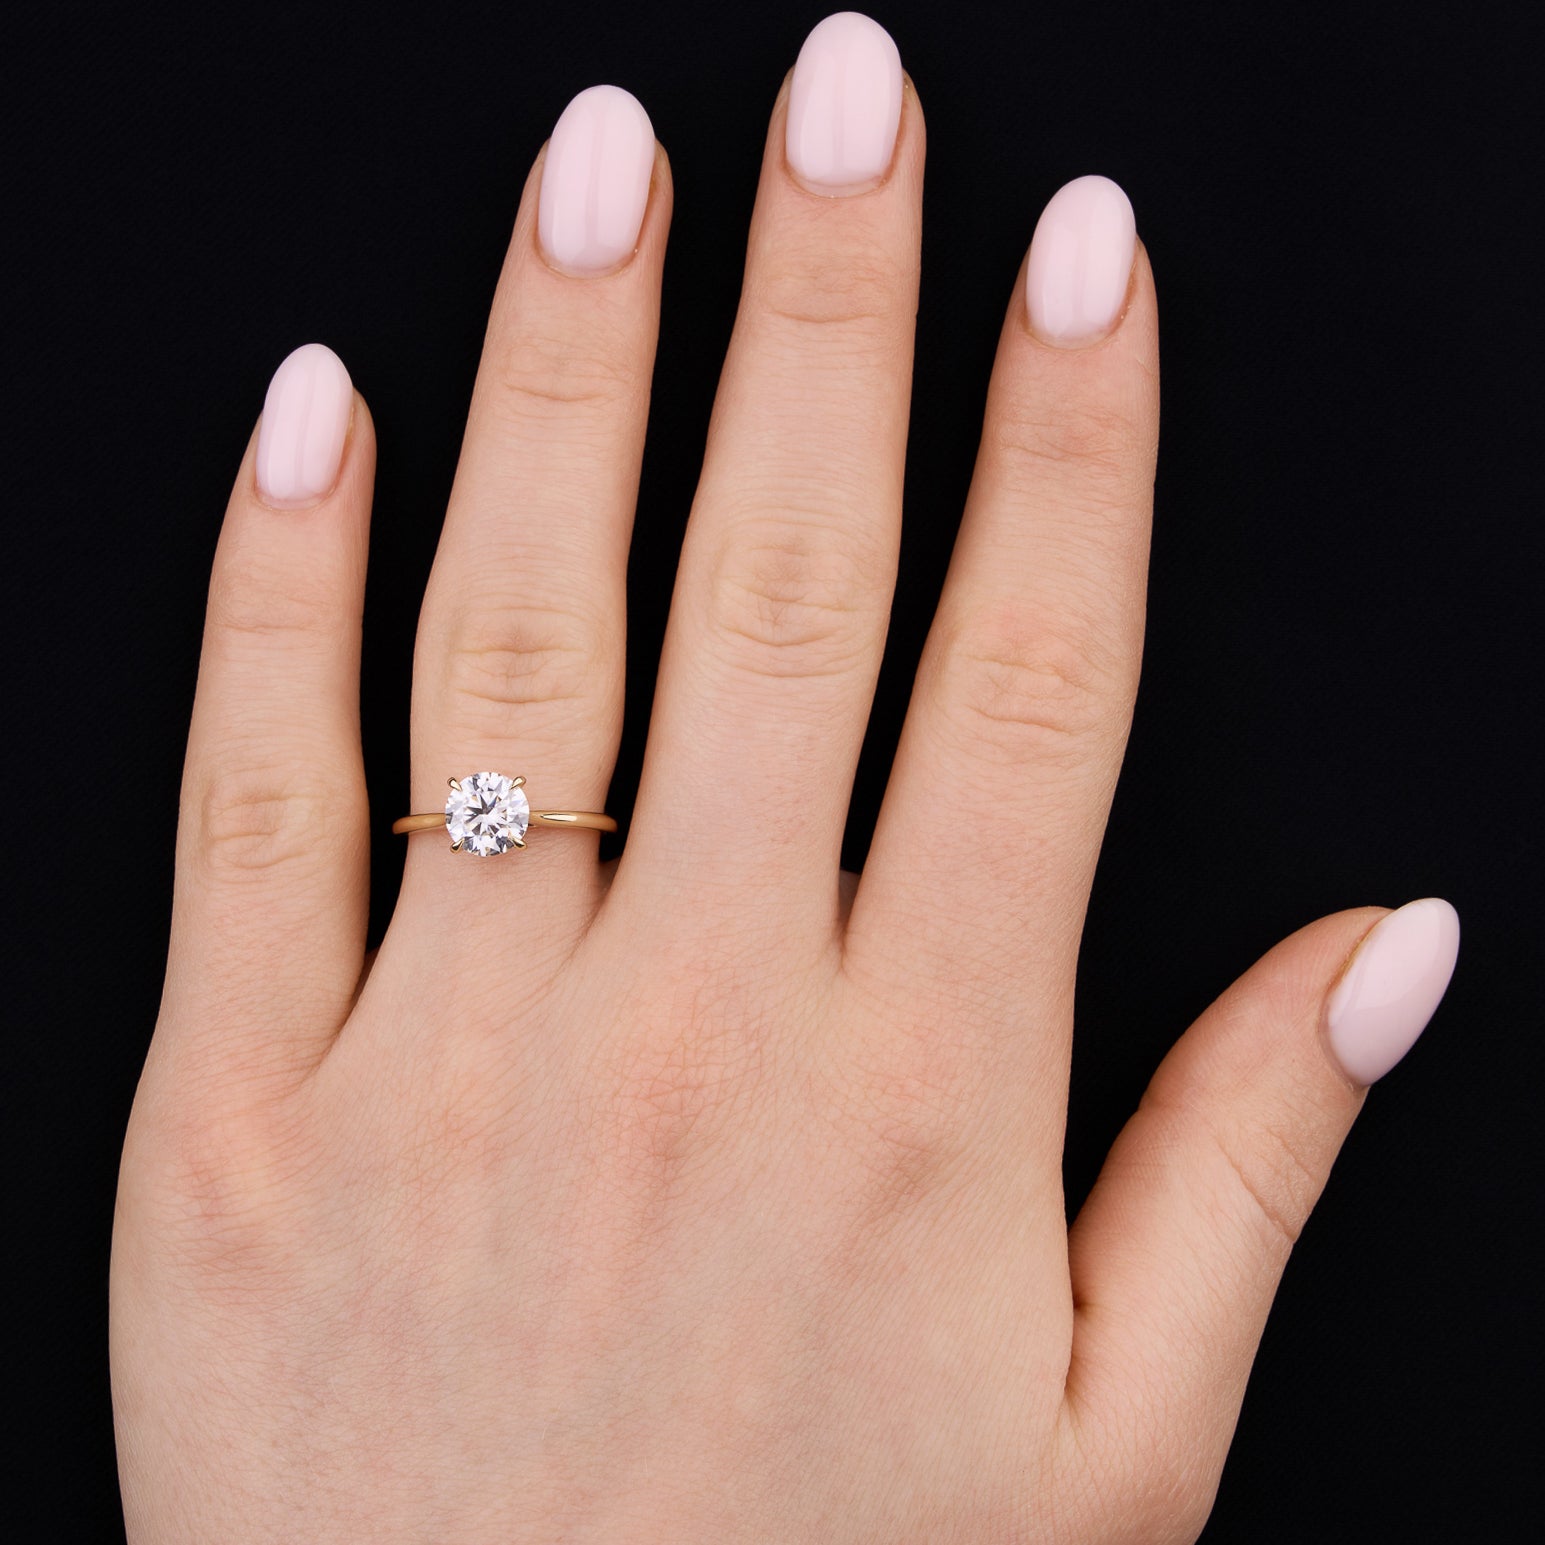 The Isla Ring - Round Cathedral Solitaire